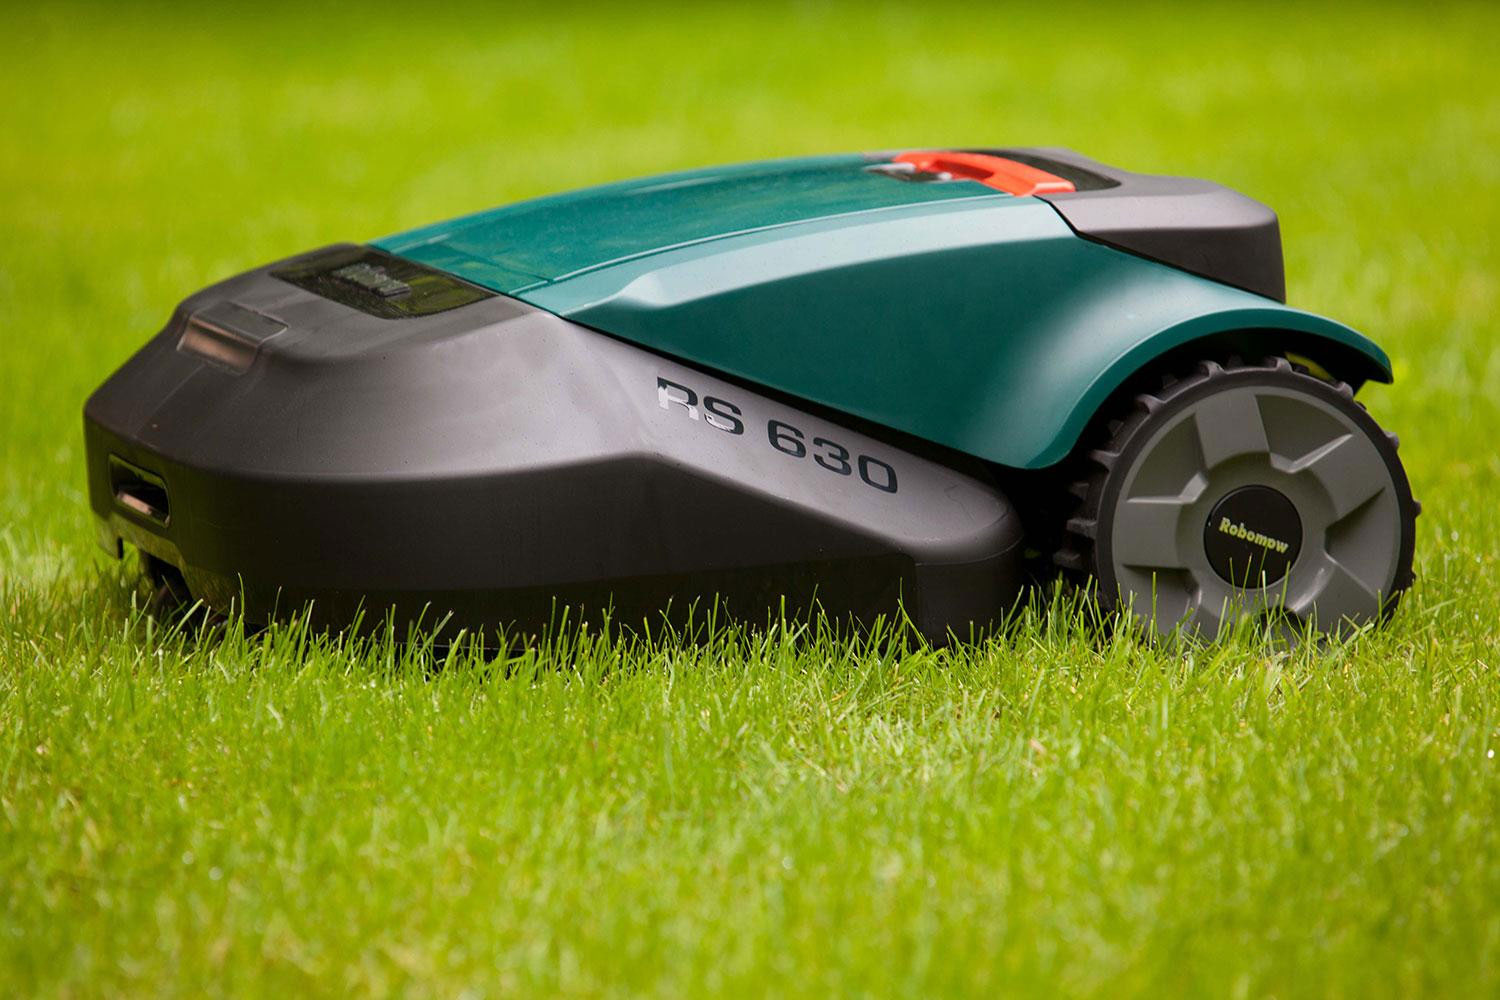 The Robomow RS630 on a lawn.